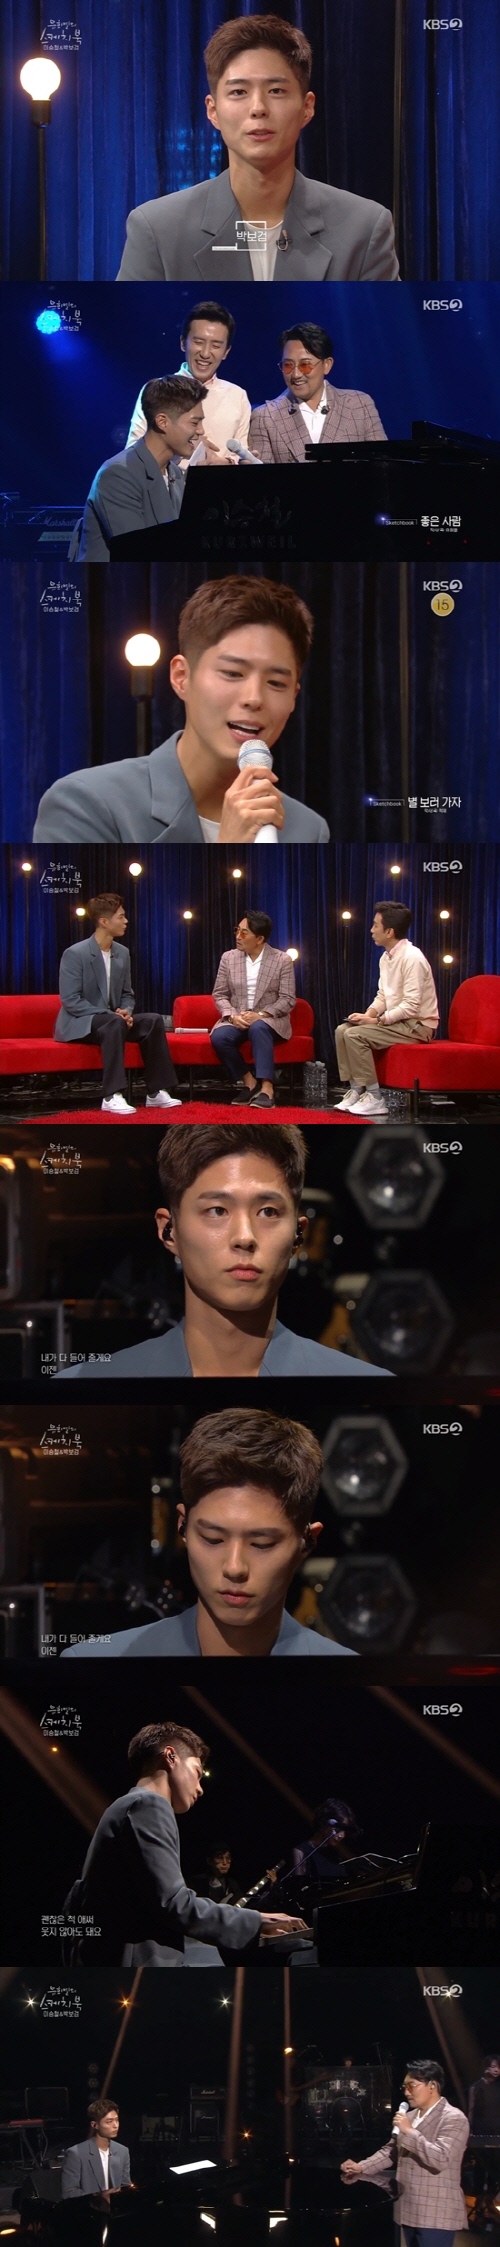 Actor Park Bo-gum showed a perfect mans aspect by showing high-quality skills from singing to Piano playing.Lee Seung-cheol and Actor Park Bo-gum, who celebrated their 35th anniversary, appeared on KBS 2TV You Hee-yeols Sketchbook broadcast on the 20th.Lee Seung-cheol and Park Bo-gum have formed a relationship with the singer as the main character of the music video on the webtoon Moonlight Sculptor OST I Love You Much released in January this year.On the day, You Hee-yeol said, Weve been doing an audience-free recording for a month. We realize that the performance is complete.I think those who will introduce this time would have liked it if the audience saw it. Lee Seung-cheol opened his door with MY LOVE, saying, I have been dereliction of my duties. I will work harder.Park Bo-gum took the Piano accompaniment skillfully of I love you a lot and set up a joint stage with Lee Seung-cheol.You Hee-yeol said: I was so good, I was hand-syncing, but I made a slight mistake at the end, my heart sank down with a little laugh, I didnt know Piano was hitting so well.I want you to do one more thing. Park Bo-gum boasted a high-quality singing ability with Lee Seung-cheols Western Sky and Toys Good Man Piano accompaniment Love Live!Delighted You Hee-yeol also played Chopstick March with Park Bo-gumPark Bo-gum introduced Park Bo-gum, who first appeared on Sketchbook thanks to Lee Seung-cheol senior.Lee Seung-cheol praised the band, saying, I first hit with the band, but I can not do it except usually.My senior first offered me a proposal and it was so glorious and I was so happy to appear as Sketchbook; I was so nervous that I fell asleep, Park Bo-gum confessed.You Hee-yeol said: Mr Park Bo-gum has been to Antenna a few times.I had a hand letter and a pretty flowerpot on my desk, so Park Bo-gum left it. Where was I so good? Park Bo-gum said, I think the bright smile of your senior tickled my heart.I also like Antennas music, but I accidentally visited the project to collaborate with Sam Kim. Love Live!, which was called in the advertisement, was also shown.Asked if he had no plans to debut as a singer, Park Bo-gum said, We are still lacking in singer debut.I do not have a plan, but I am faithful to acting and I often want to meet fans. Park Bo-gum and You Hee-yeol recalled the days of Music Bank MC and introduced Lee Seung-cheols last stage, Nobody else like that.Photo: KBS Broadcasting Screen